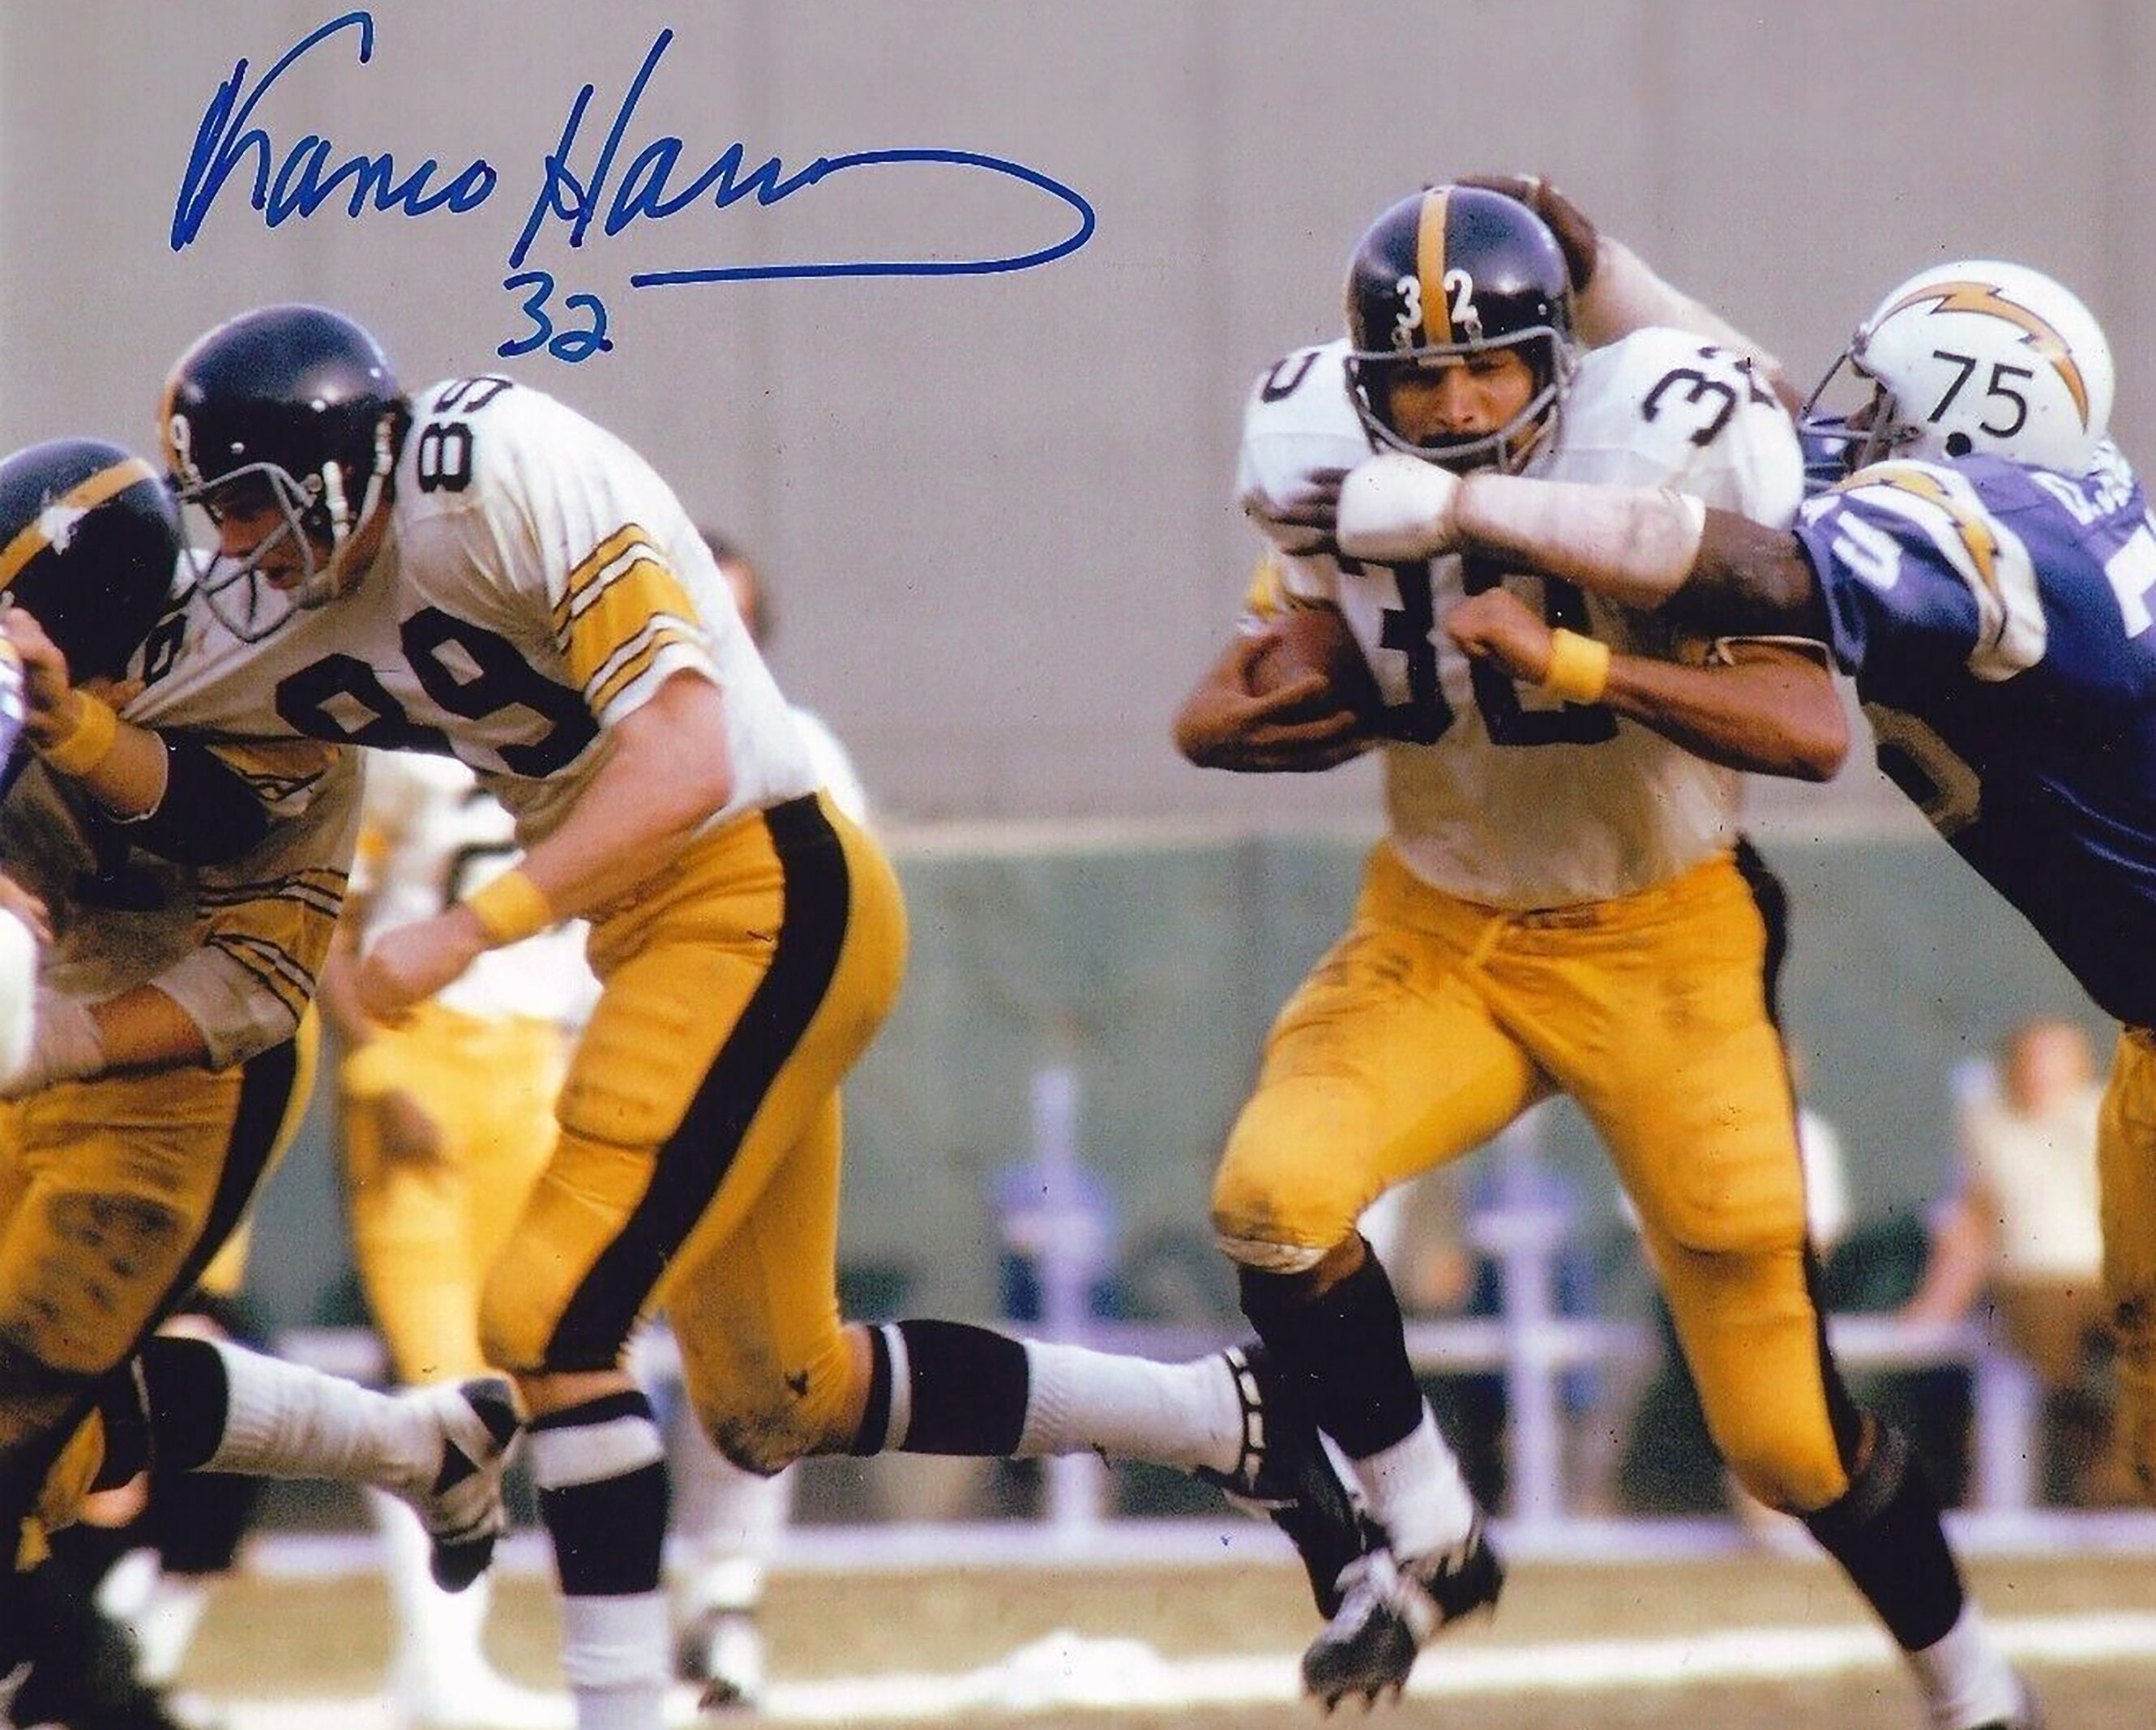 RP ** Franko Harris ** Pittsburgh Steelers Signed Autographed 8x10 Photo 